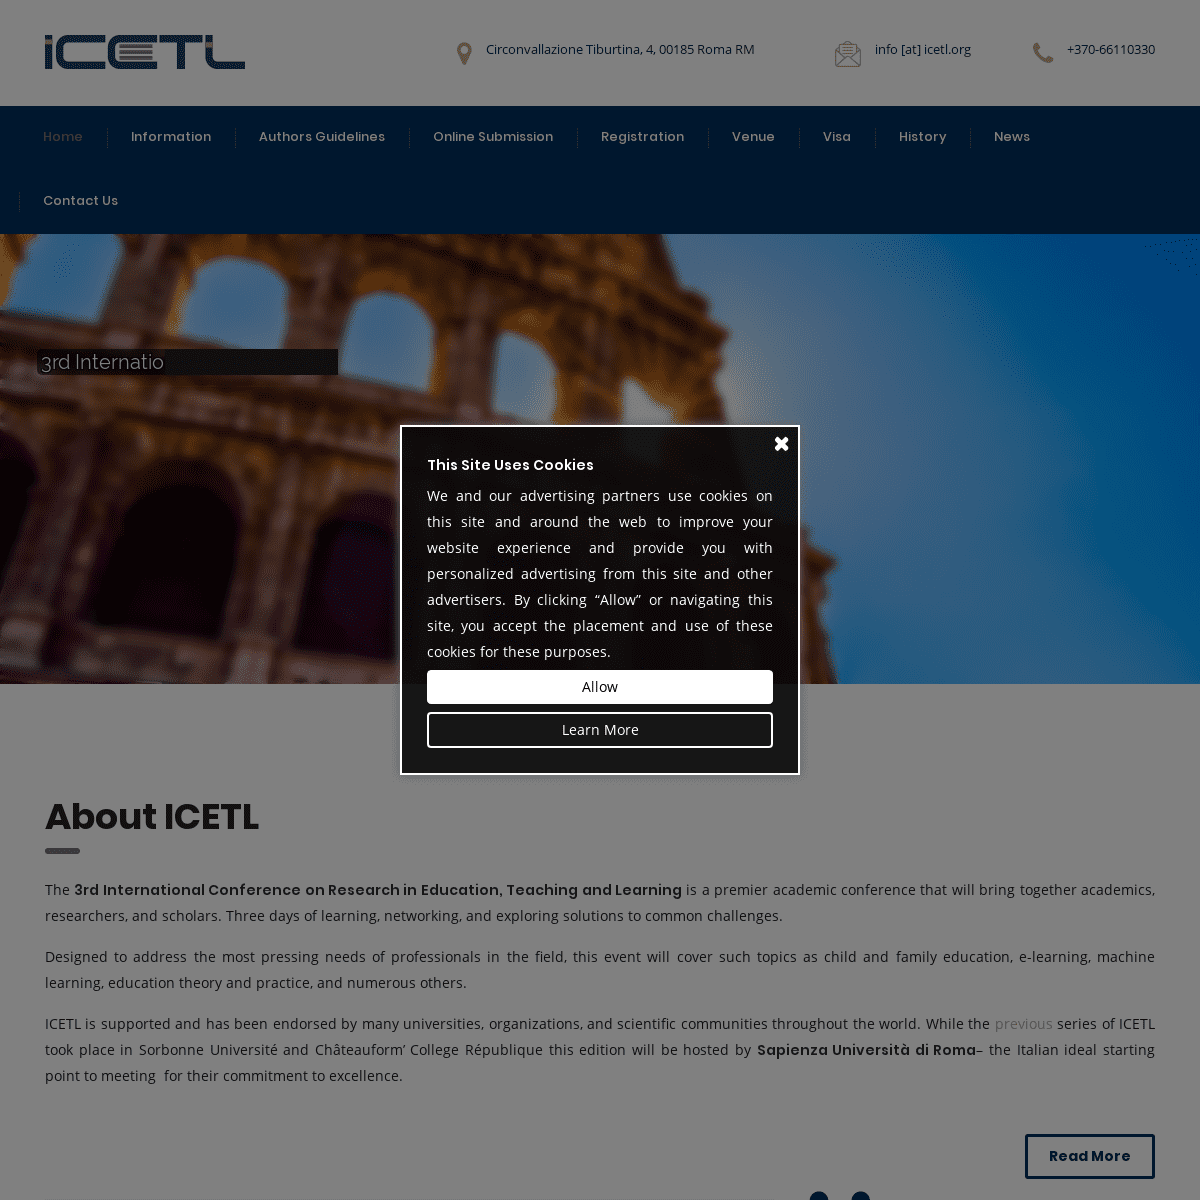 A complete backup of icetl.org